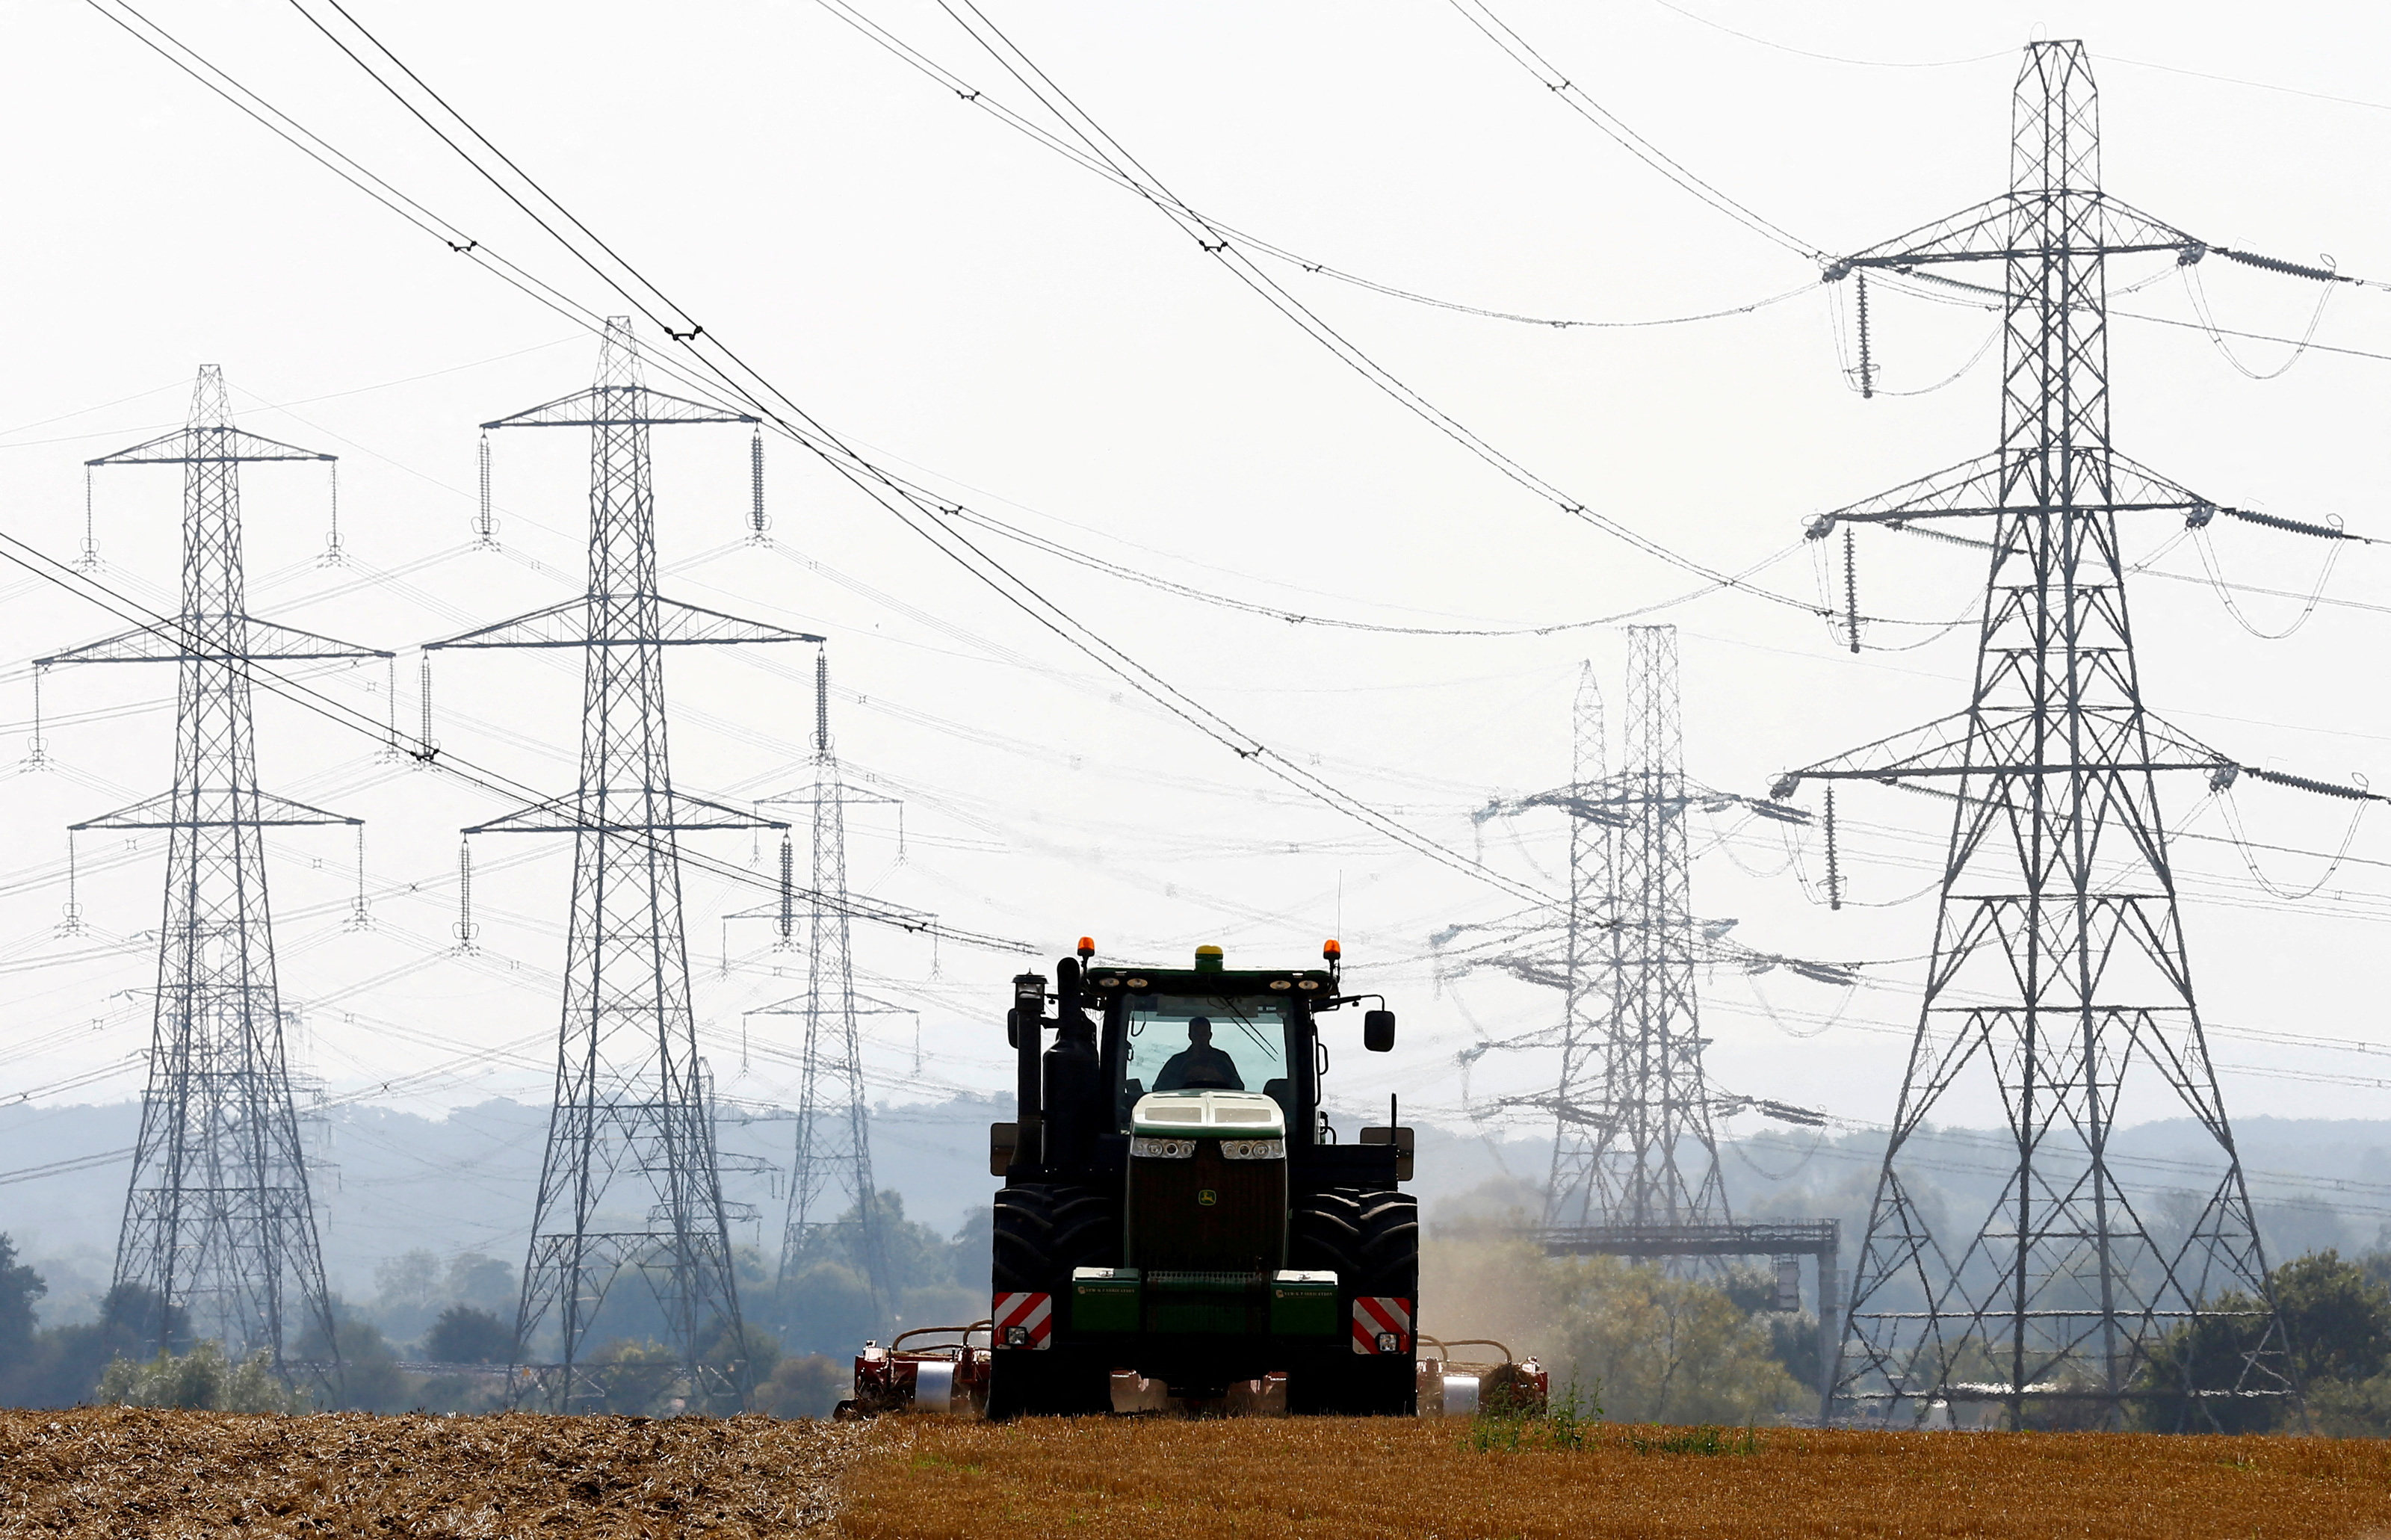 A farmer works in a field surrounded by electricity pylons in Ratcliffe-on-Soar, central England. Photo: Reuters